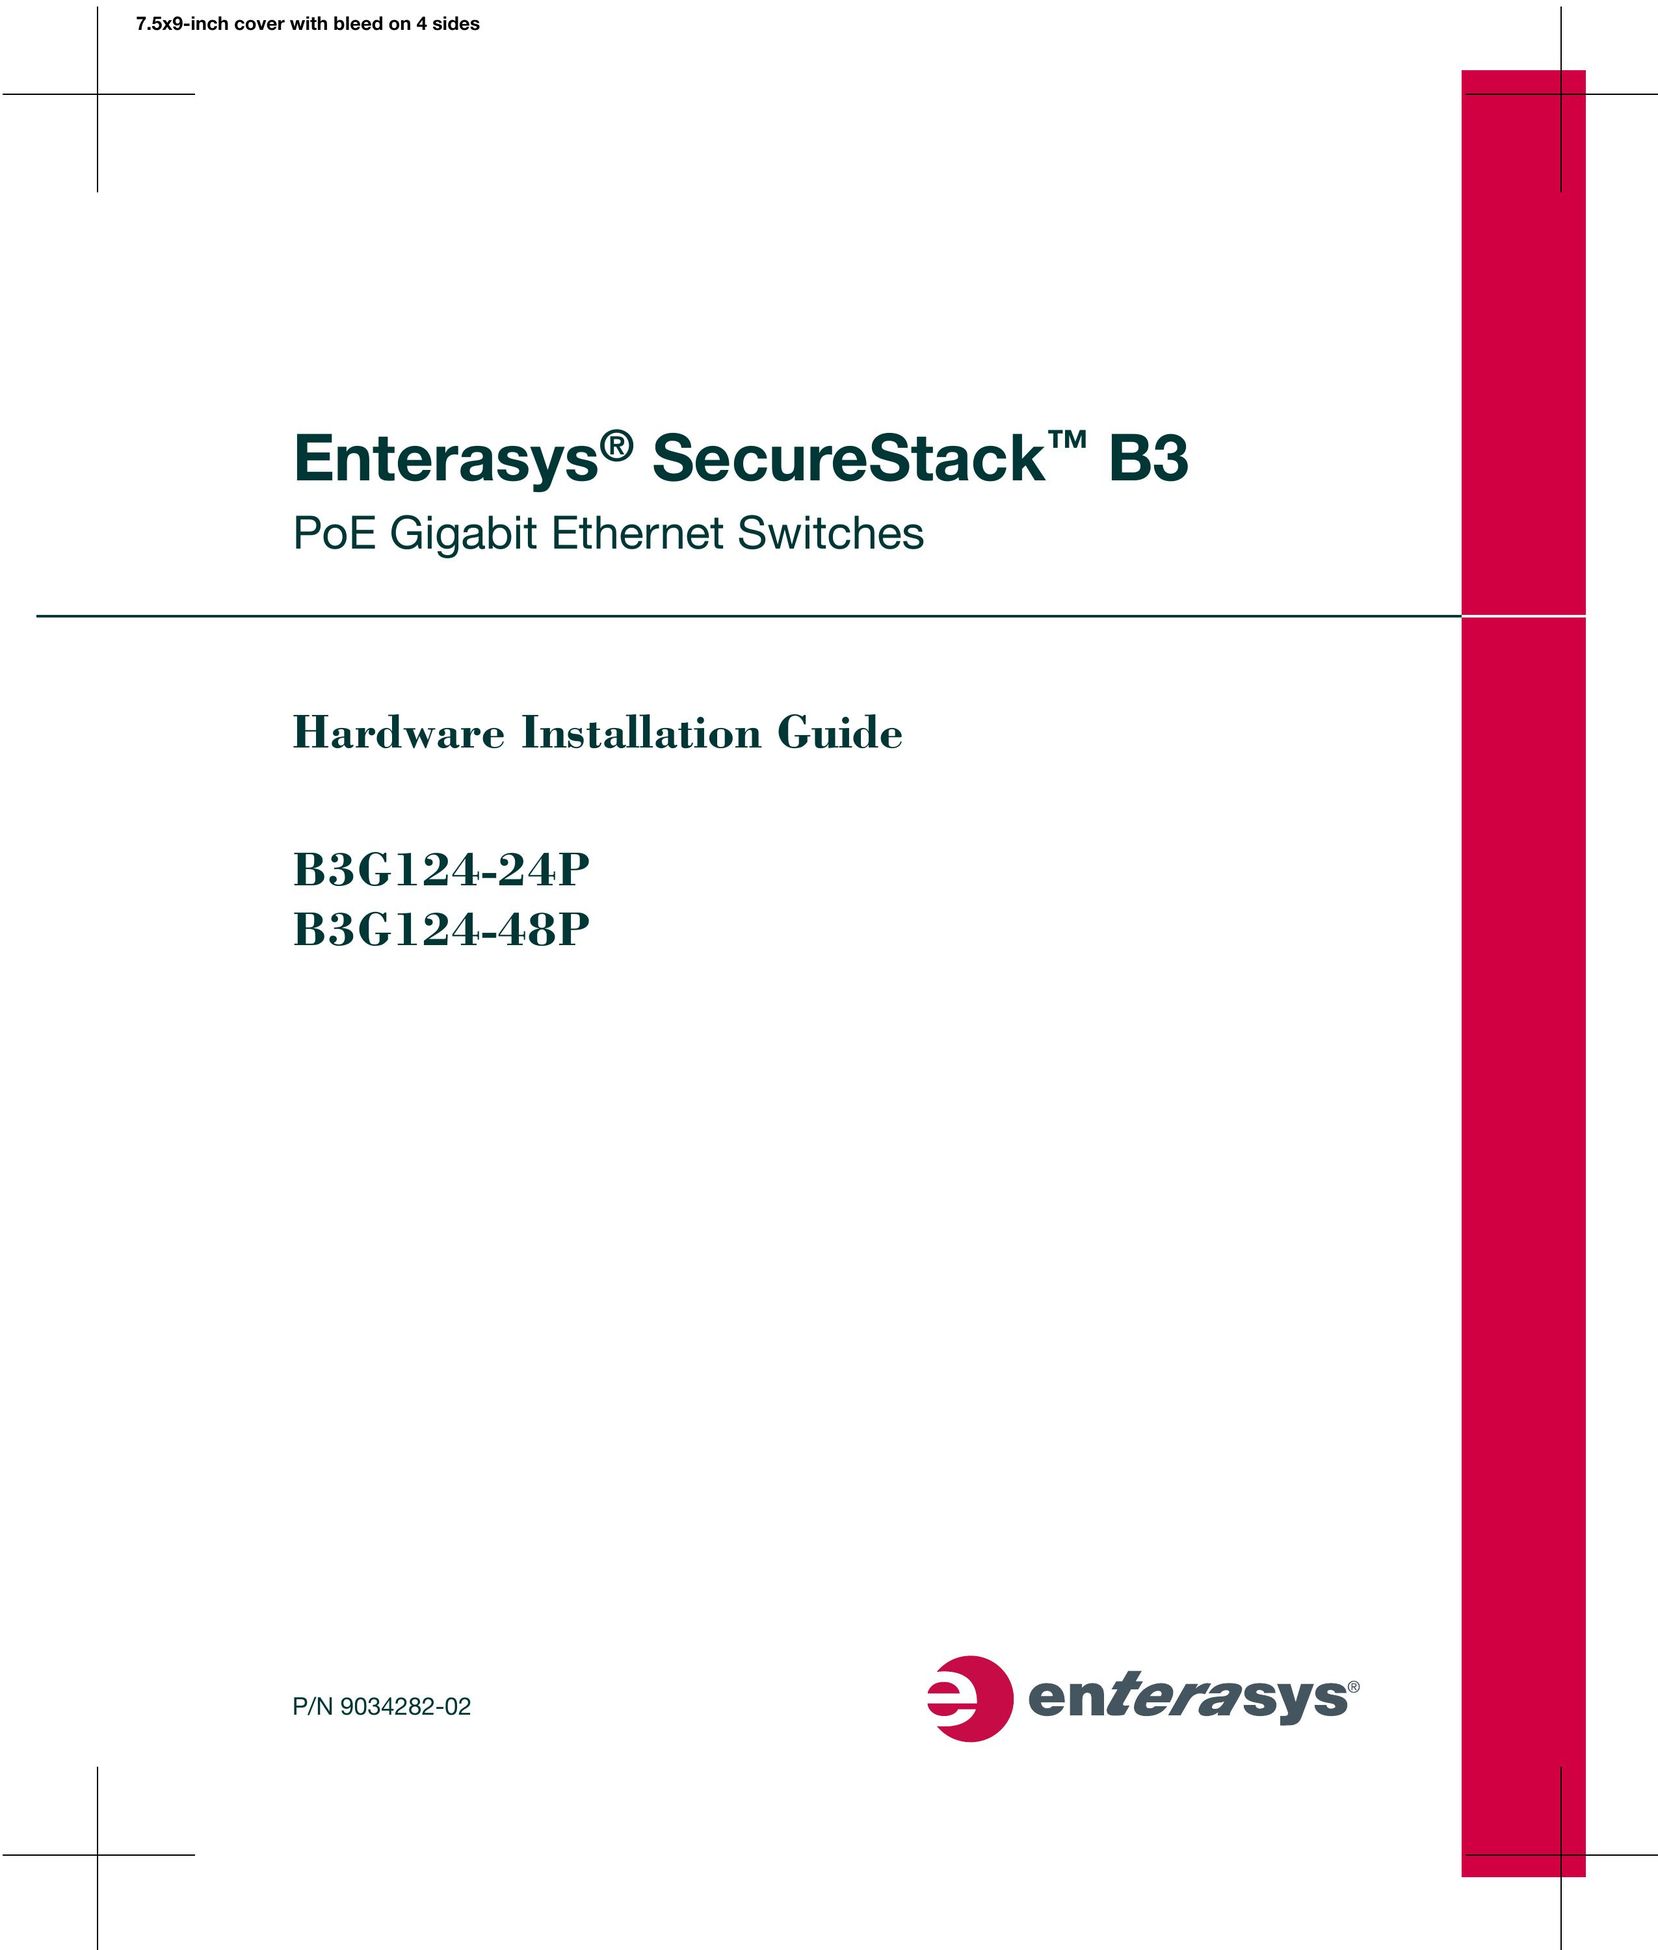 Enterasys Networks B3G124-24P Switch User Manual